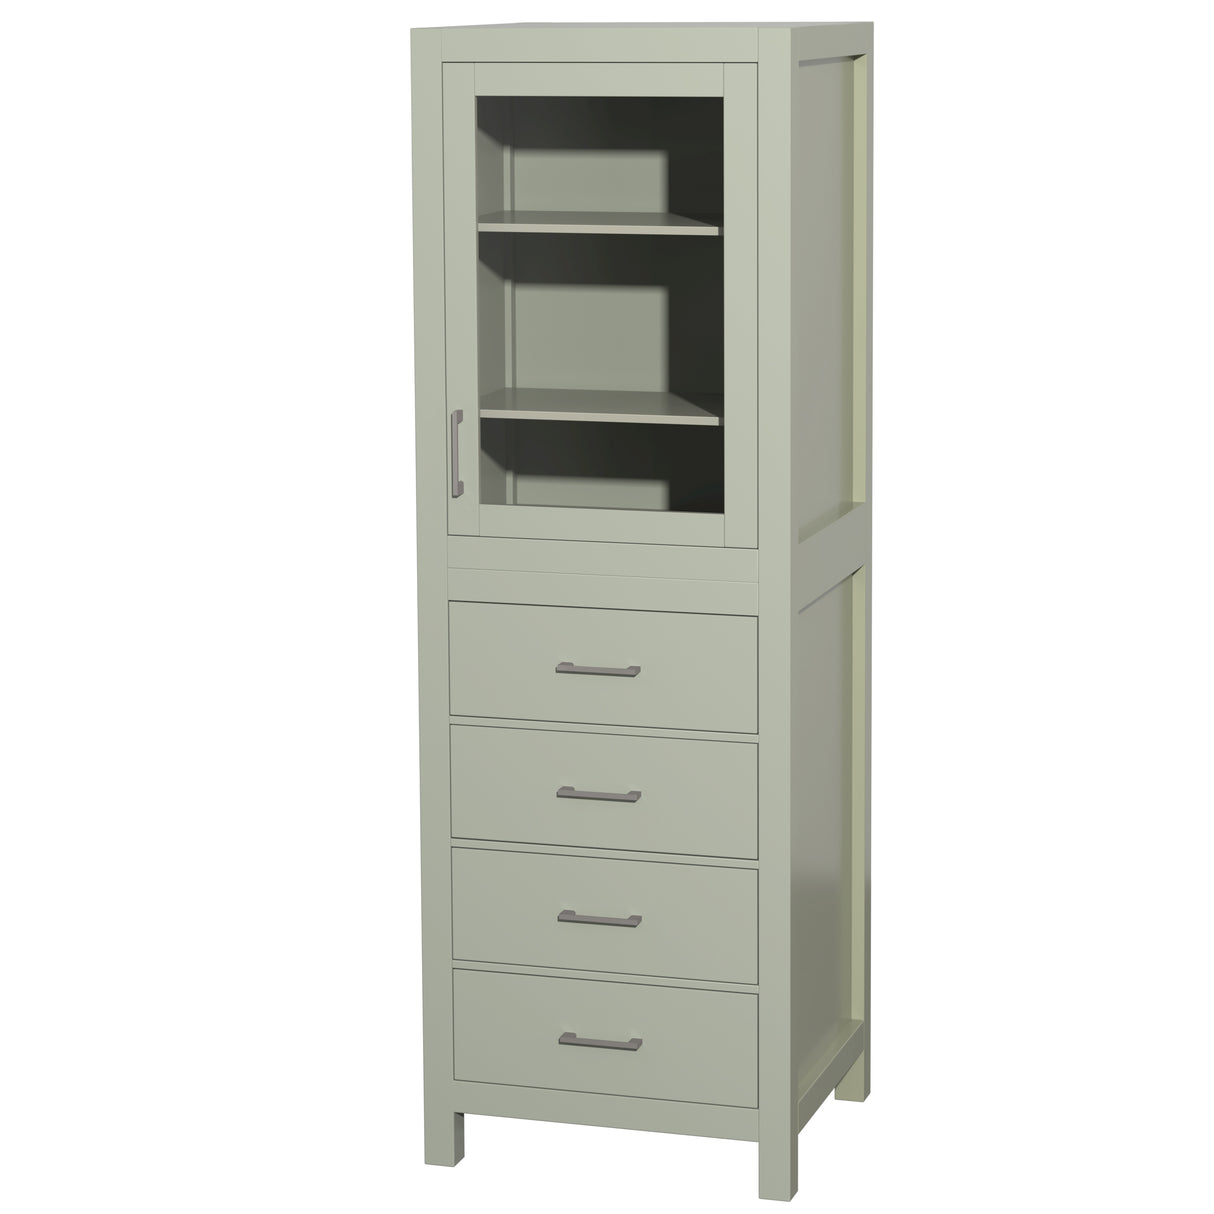 Sheffield 24 Inch Linen Tower in Light Green with Shelved Cabinet Storage and 4 Drawers